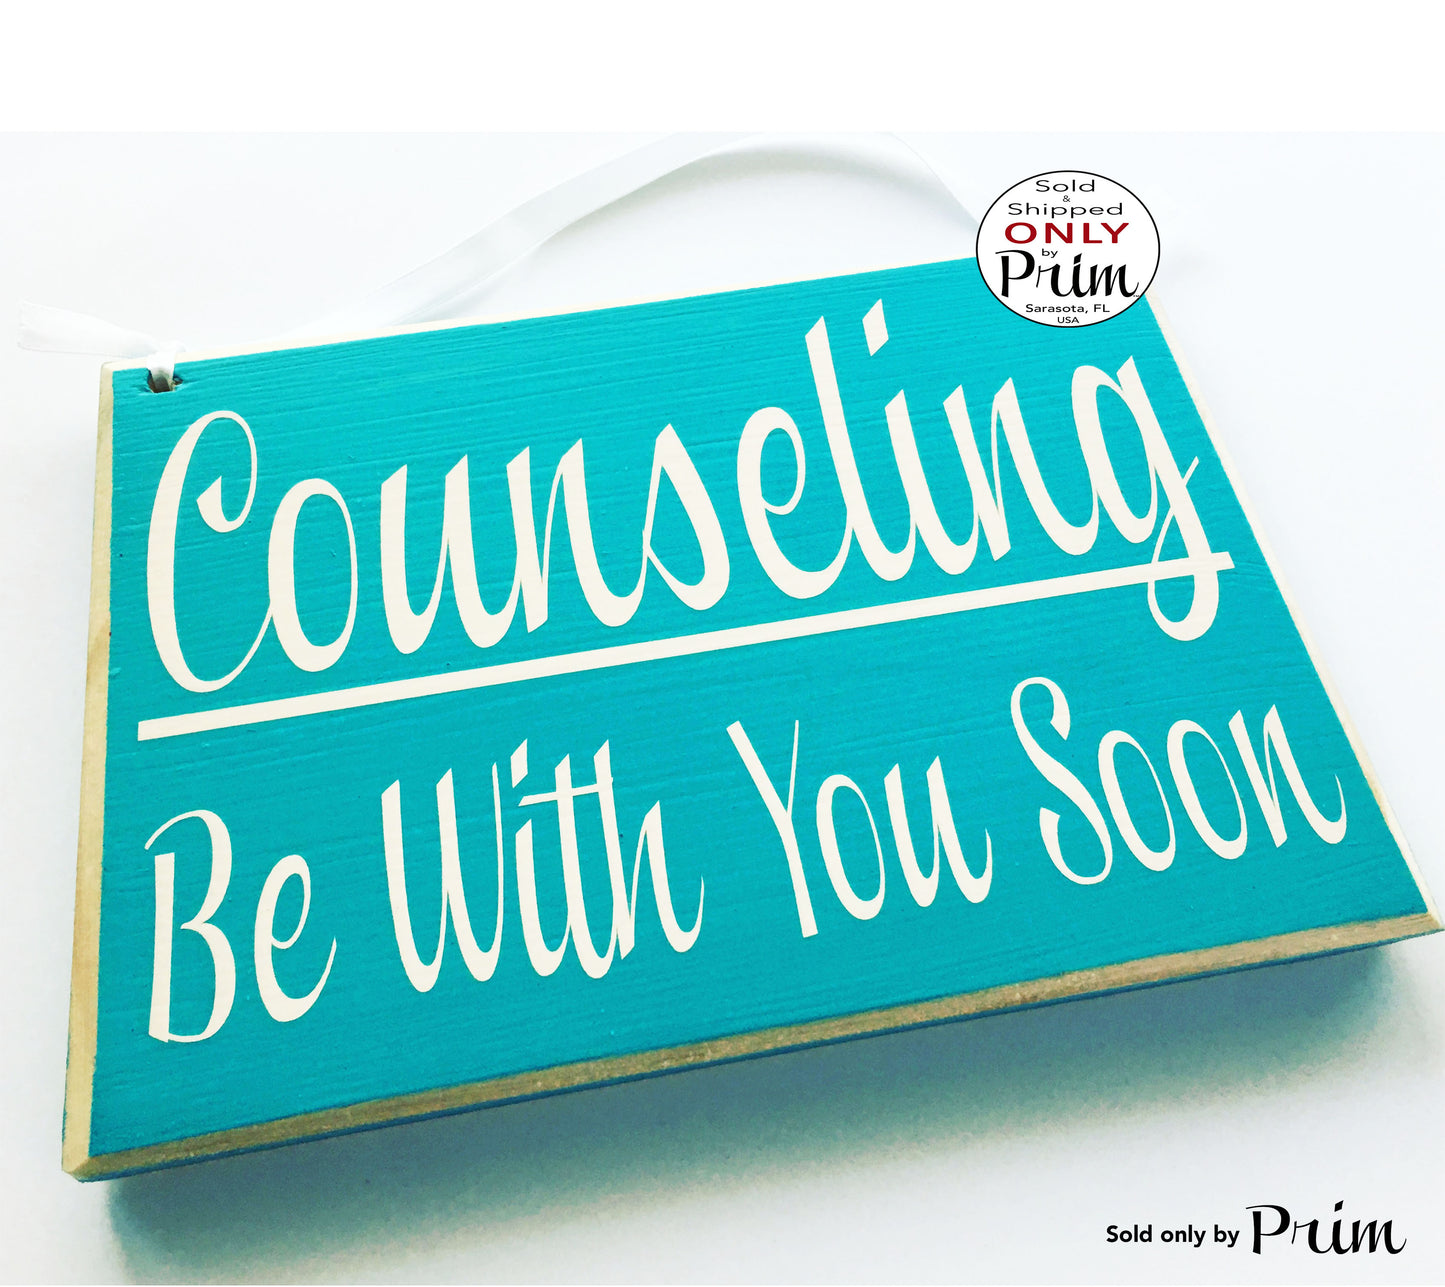 8x6 Counseling Be With You Soon Custom Wood Sign Counselor In Session Progress Please DO Not Disturb